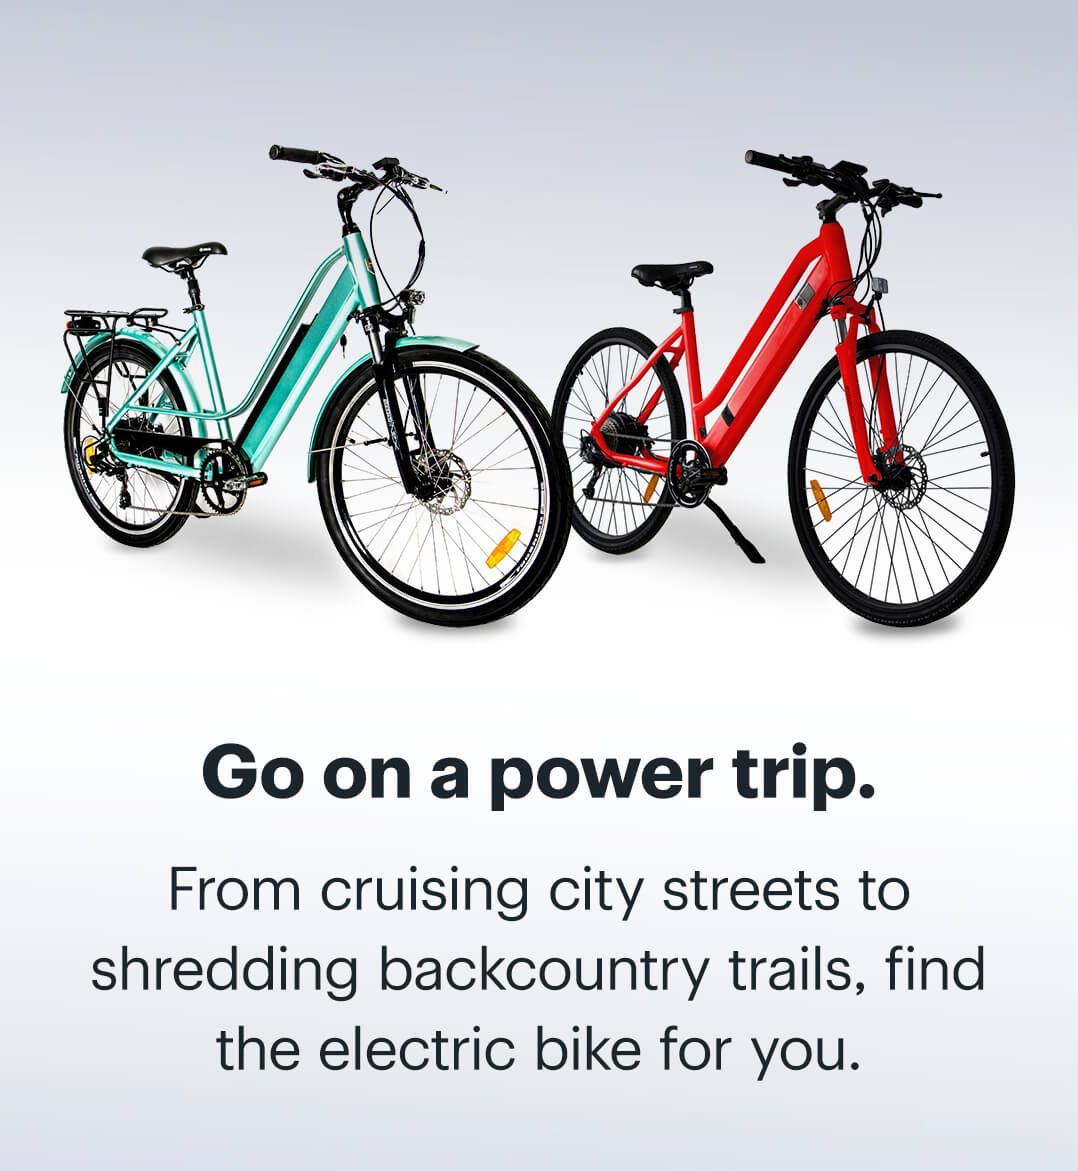 hero electric cycle online